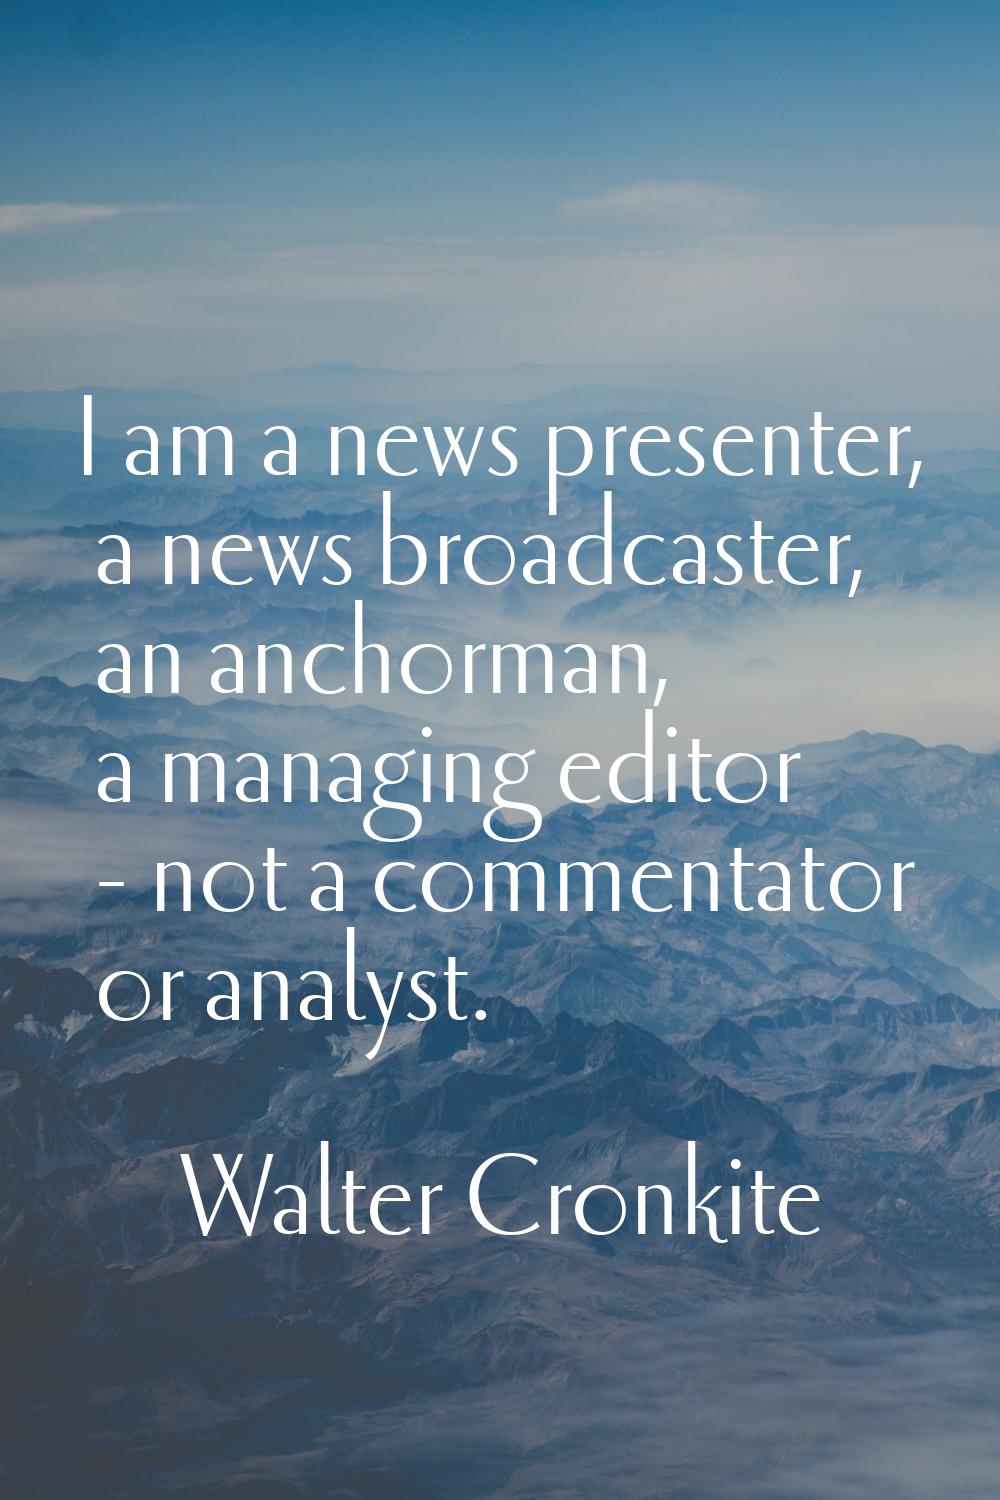 I am a news presenter, a news broadcaster, an anchorman, a managing editor - not a commentator or a